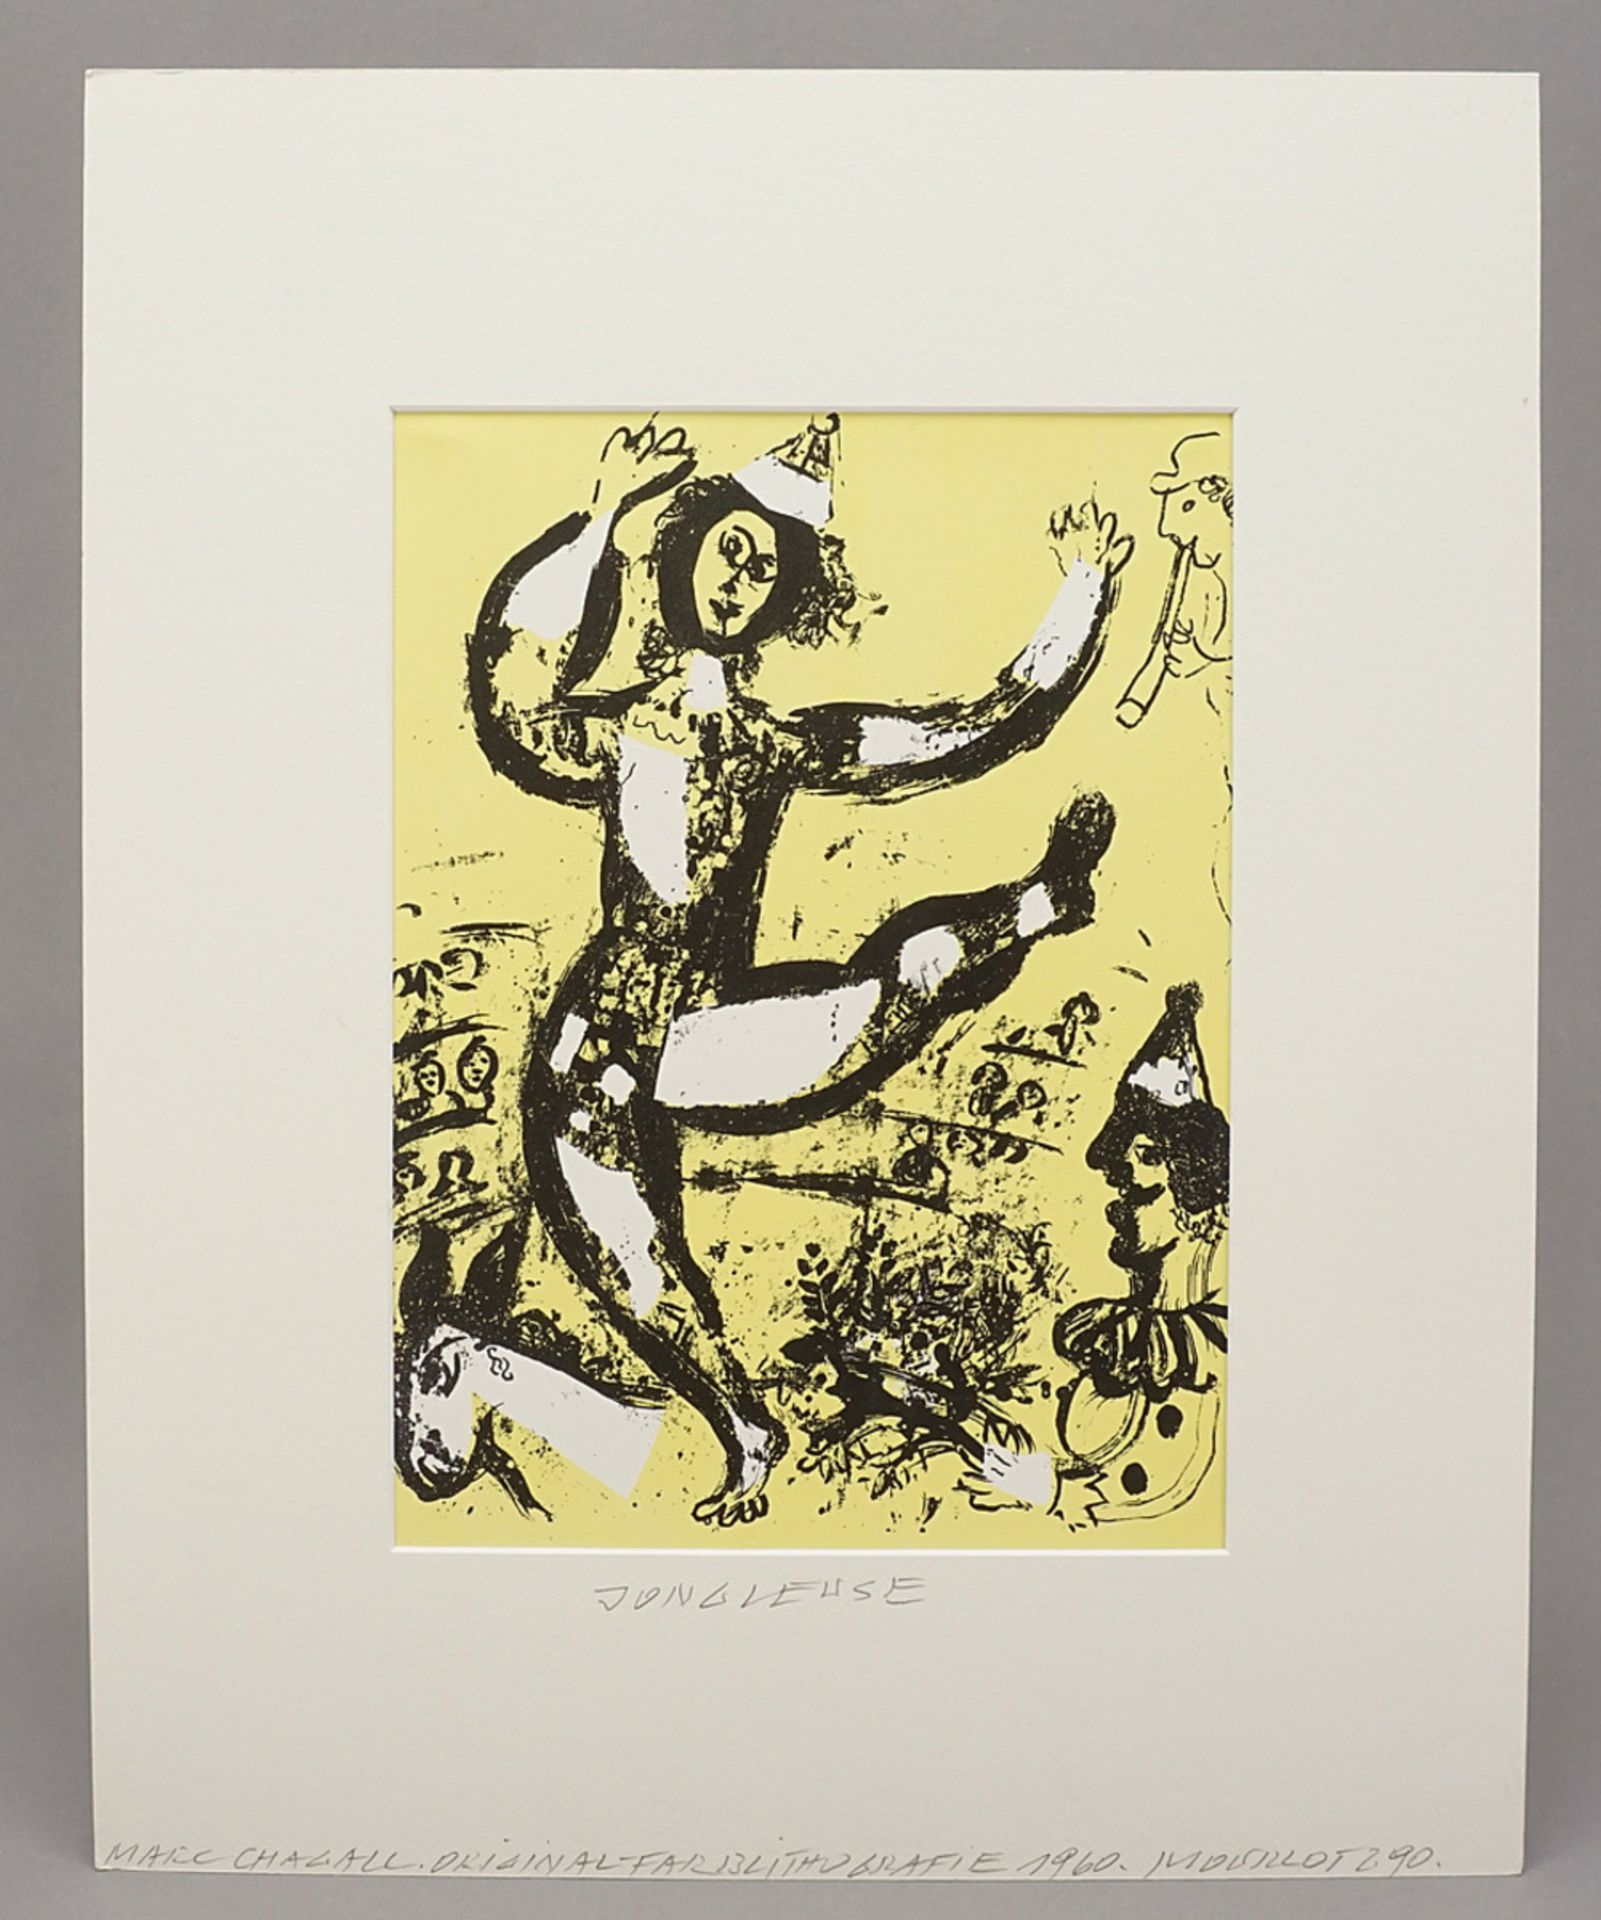 Marc Chagall (1887-1985), "Le Cirque" (The Circus) - Image 2 of 3